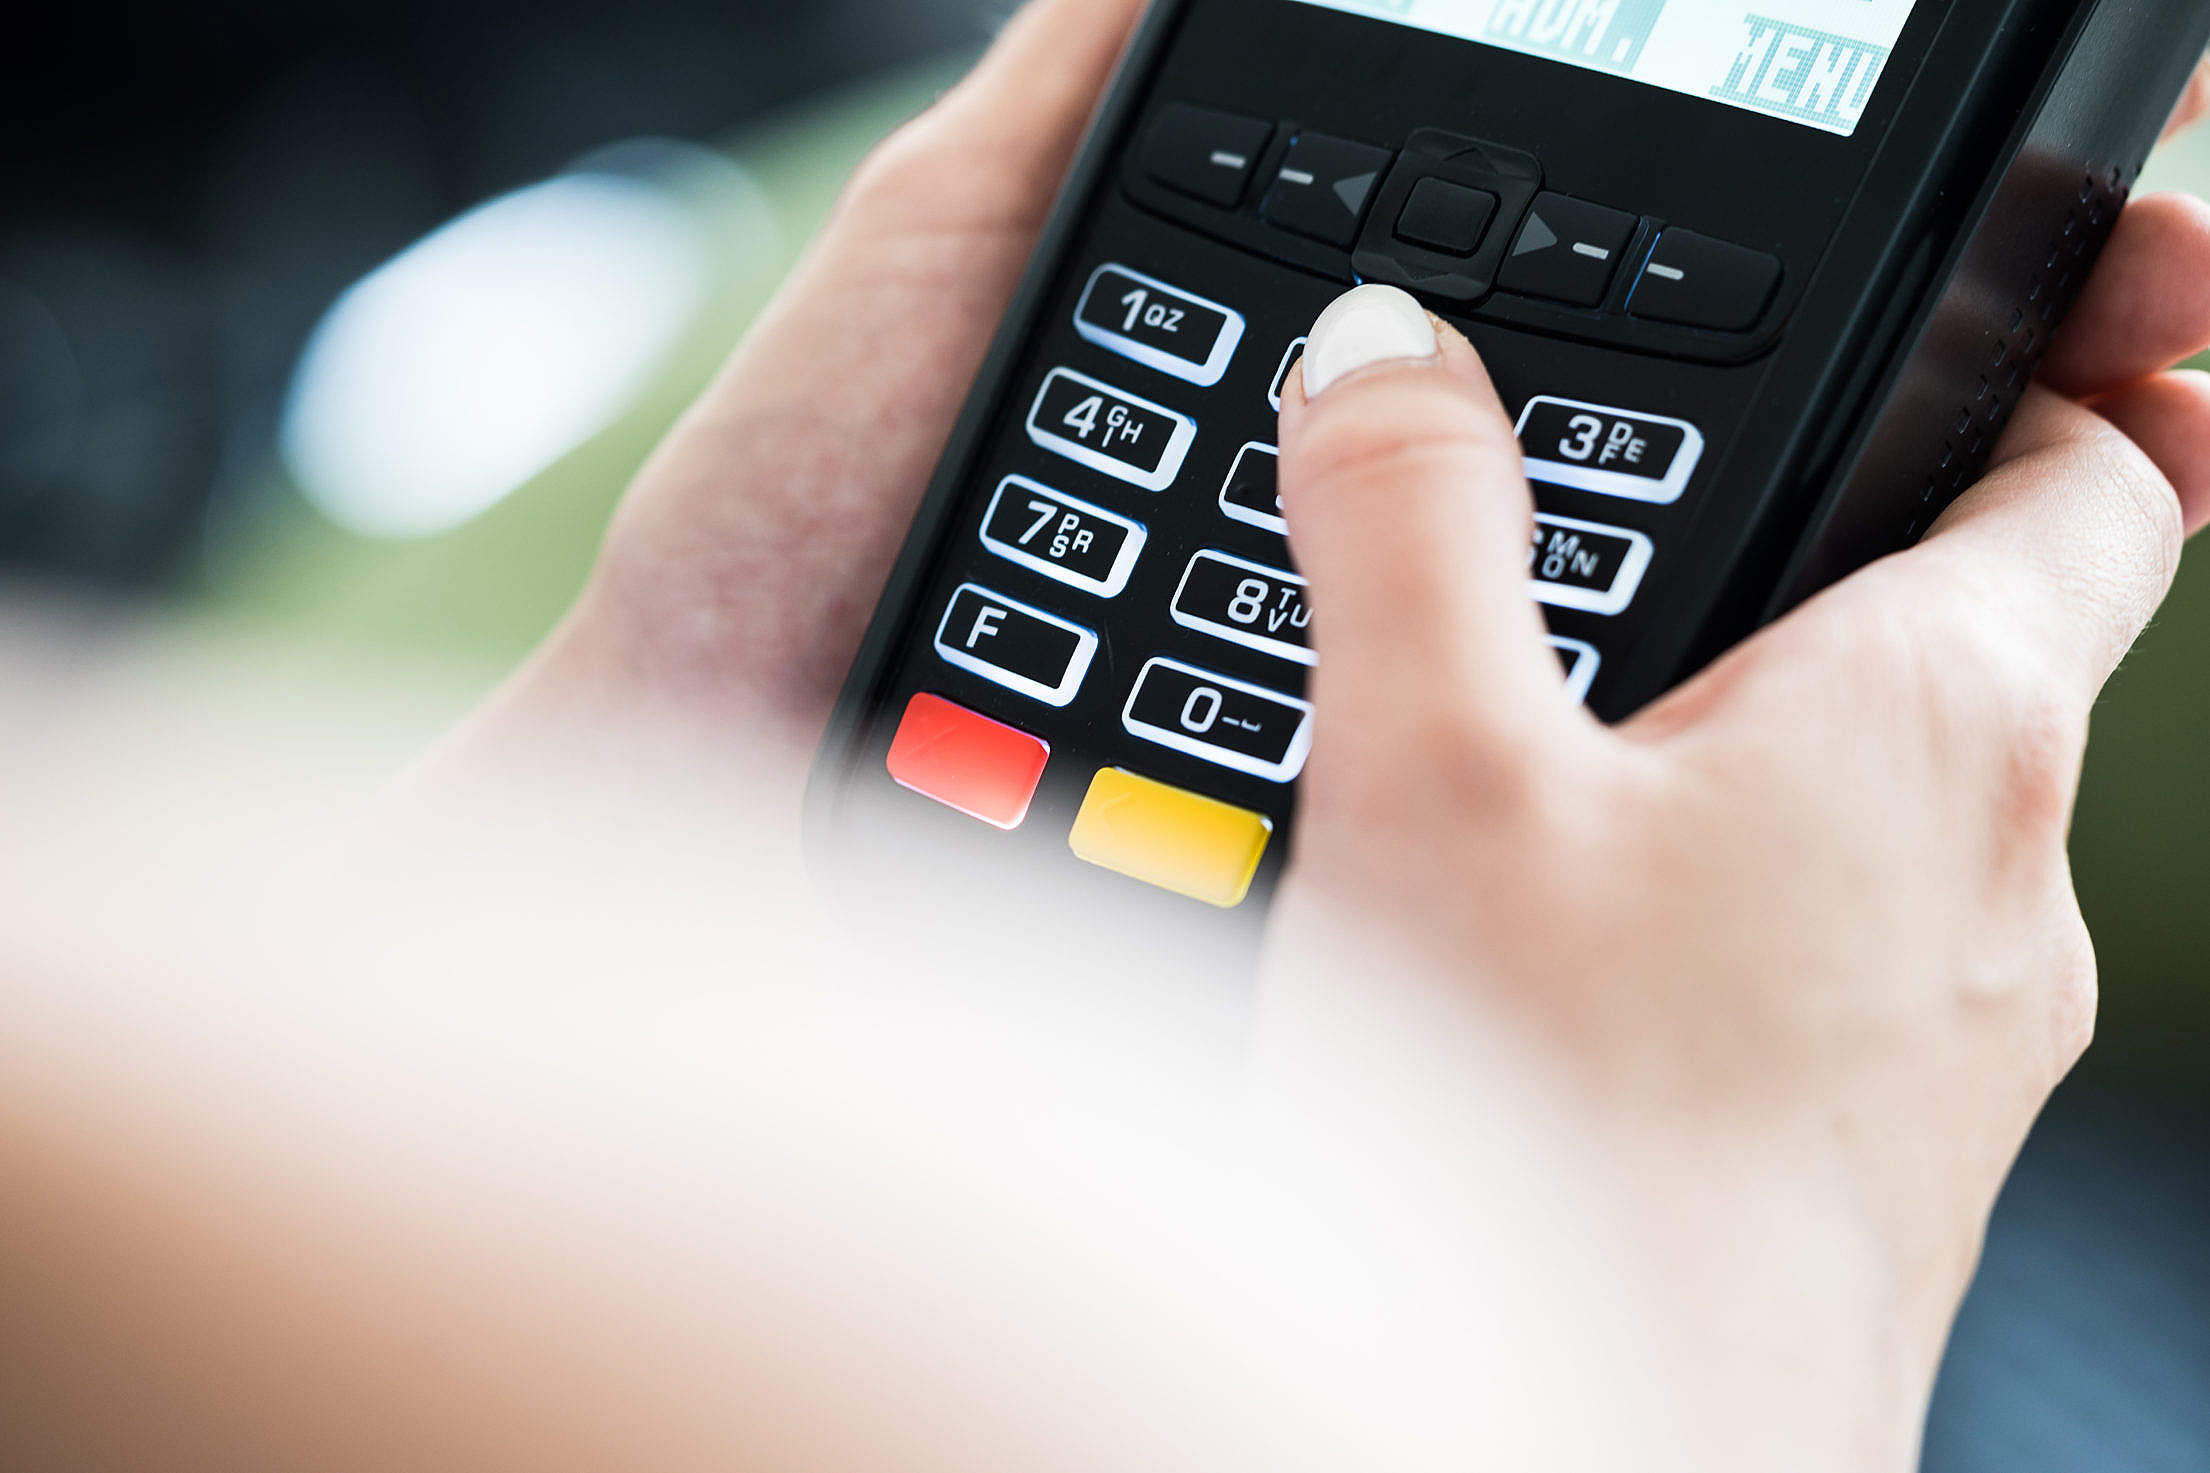 (click to download) Credit Card Terminal Payment FREE Stock Photo